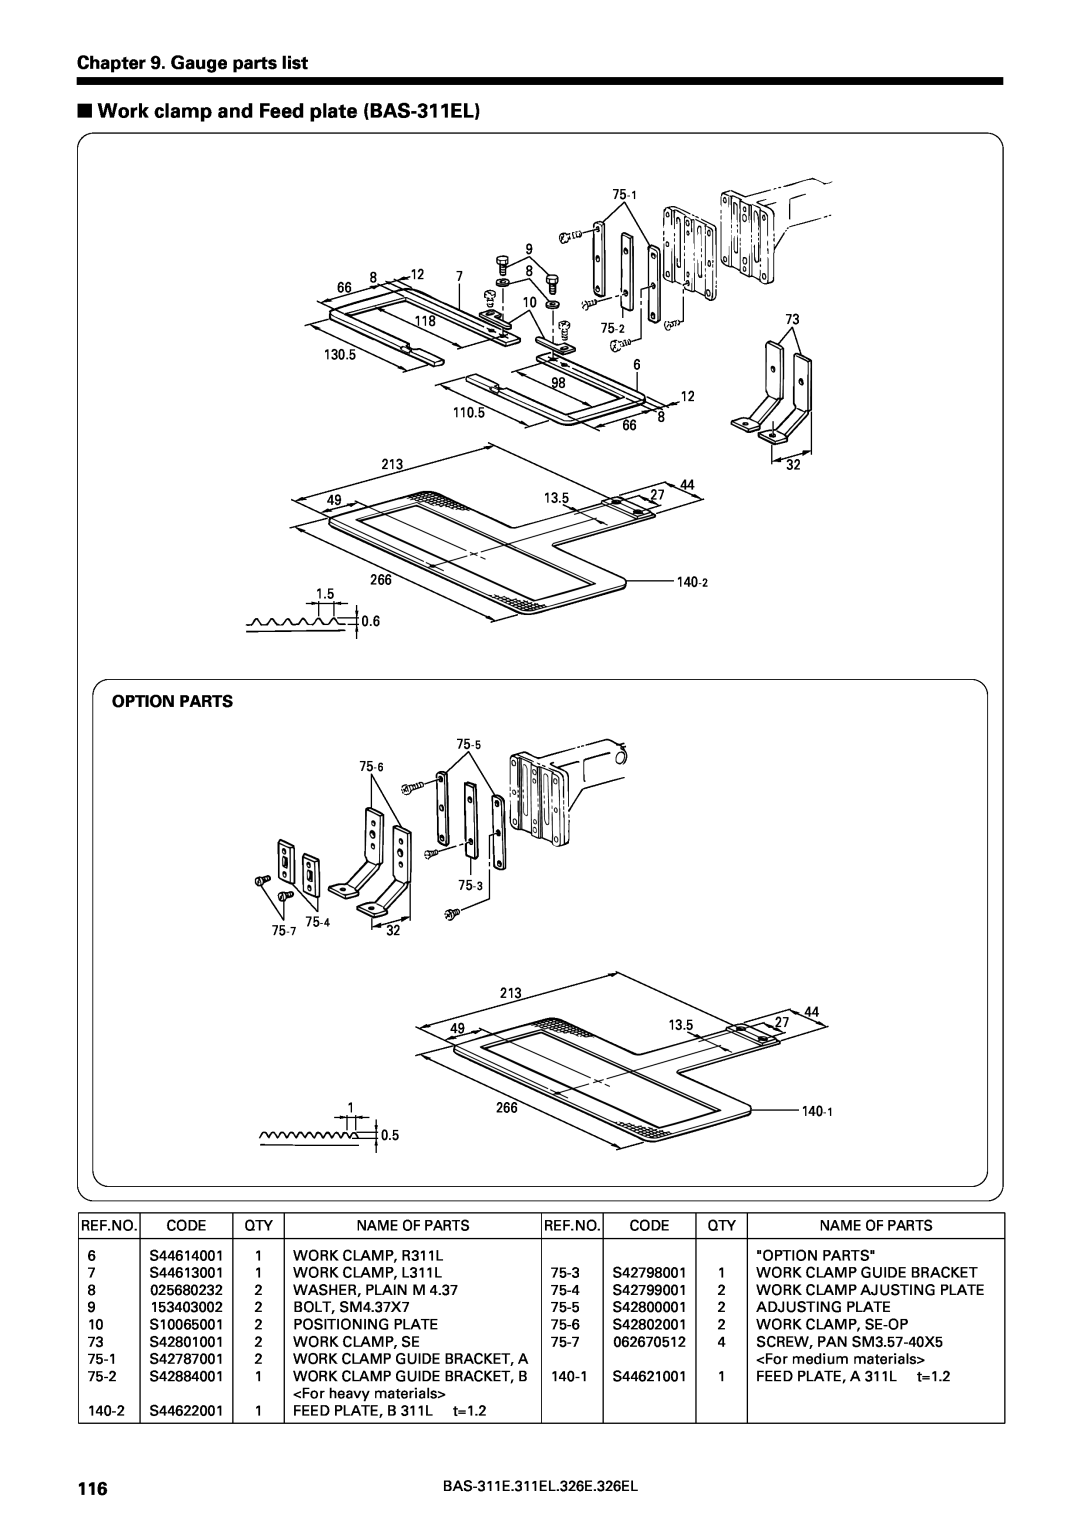 Brother service manual Work clamp and Feed plate BAS-311EL, Gauge parts list, Option Parts 